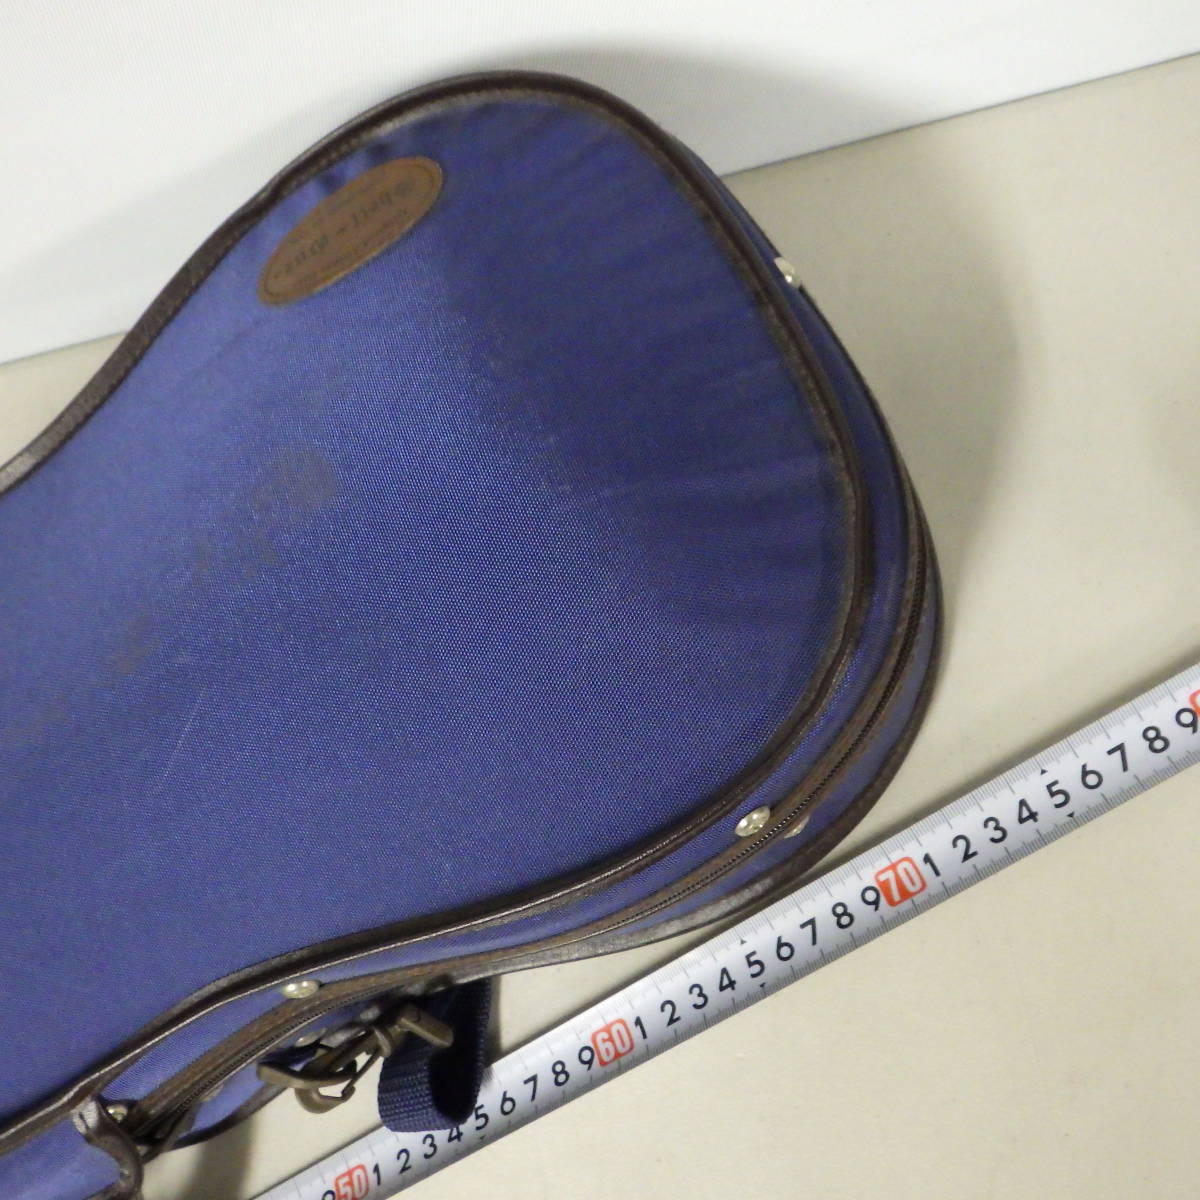 39 Orient musical instruments violin case va Io Lynn case Shell-One total length approximately 76cm degree key attaching 